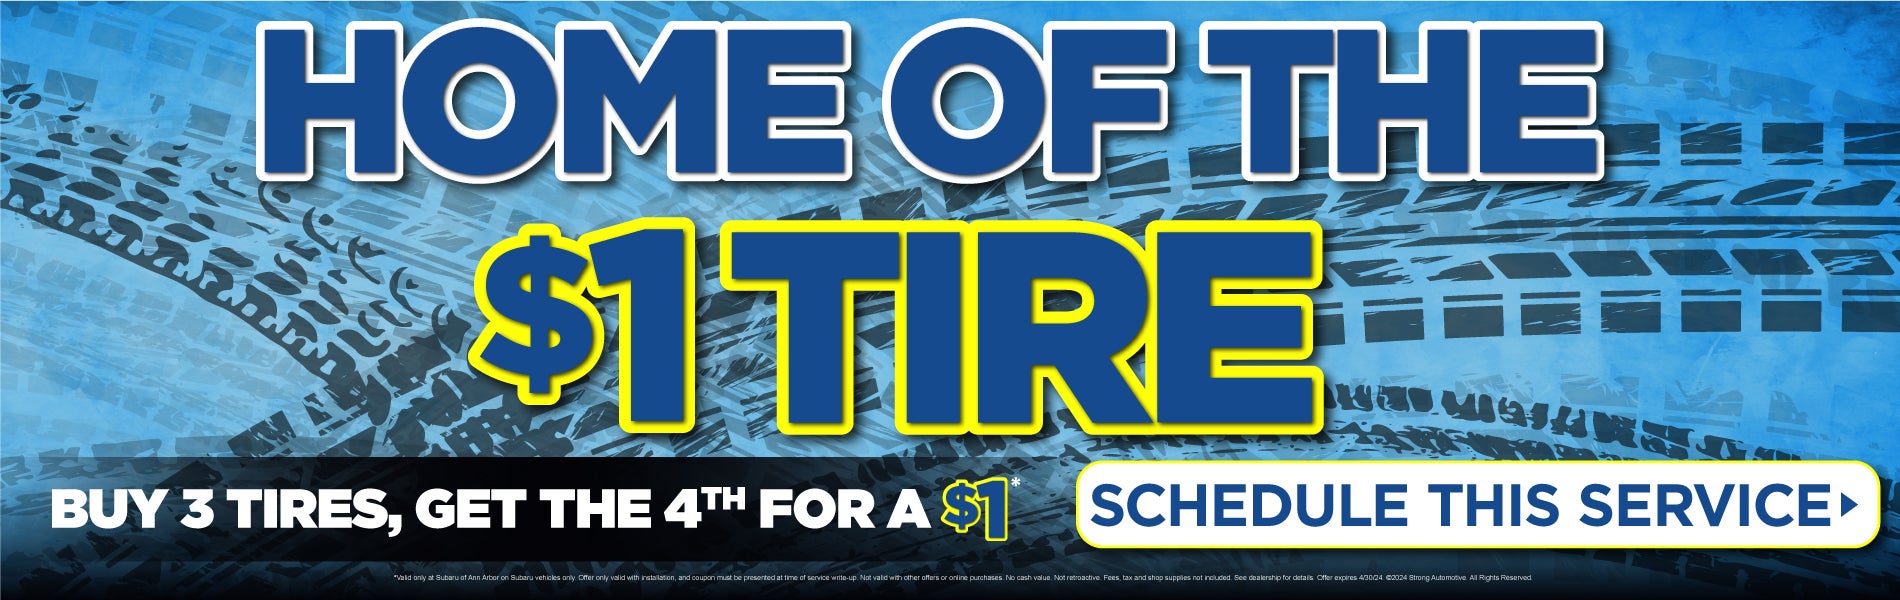 Buy 3 tires get the 4th for $1 - Schedule this service